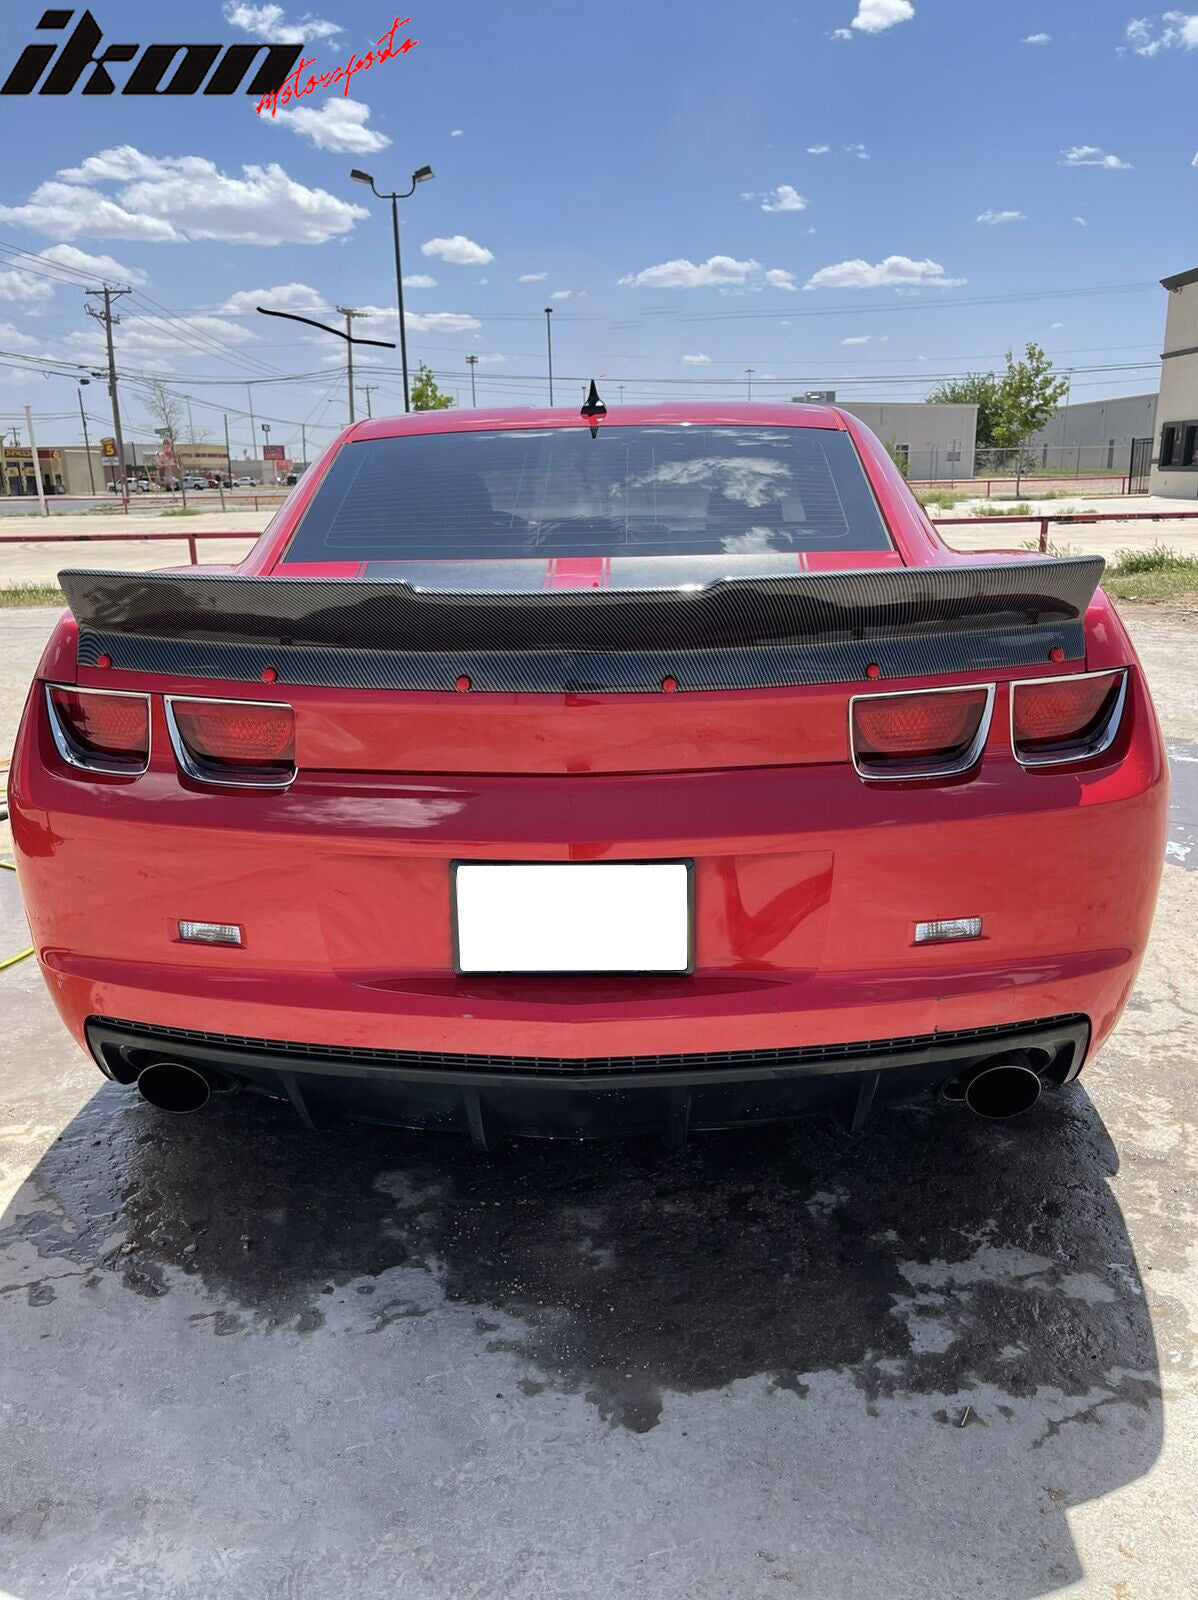 IKON MOTORSPORTS Trunk Spoiler Wing Compatible With 2010-2013 Chevrolet Camaro, Ikon Style Carbon Fiber Print PP Added On Rear Trunk Spoiler Lip Wing